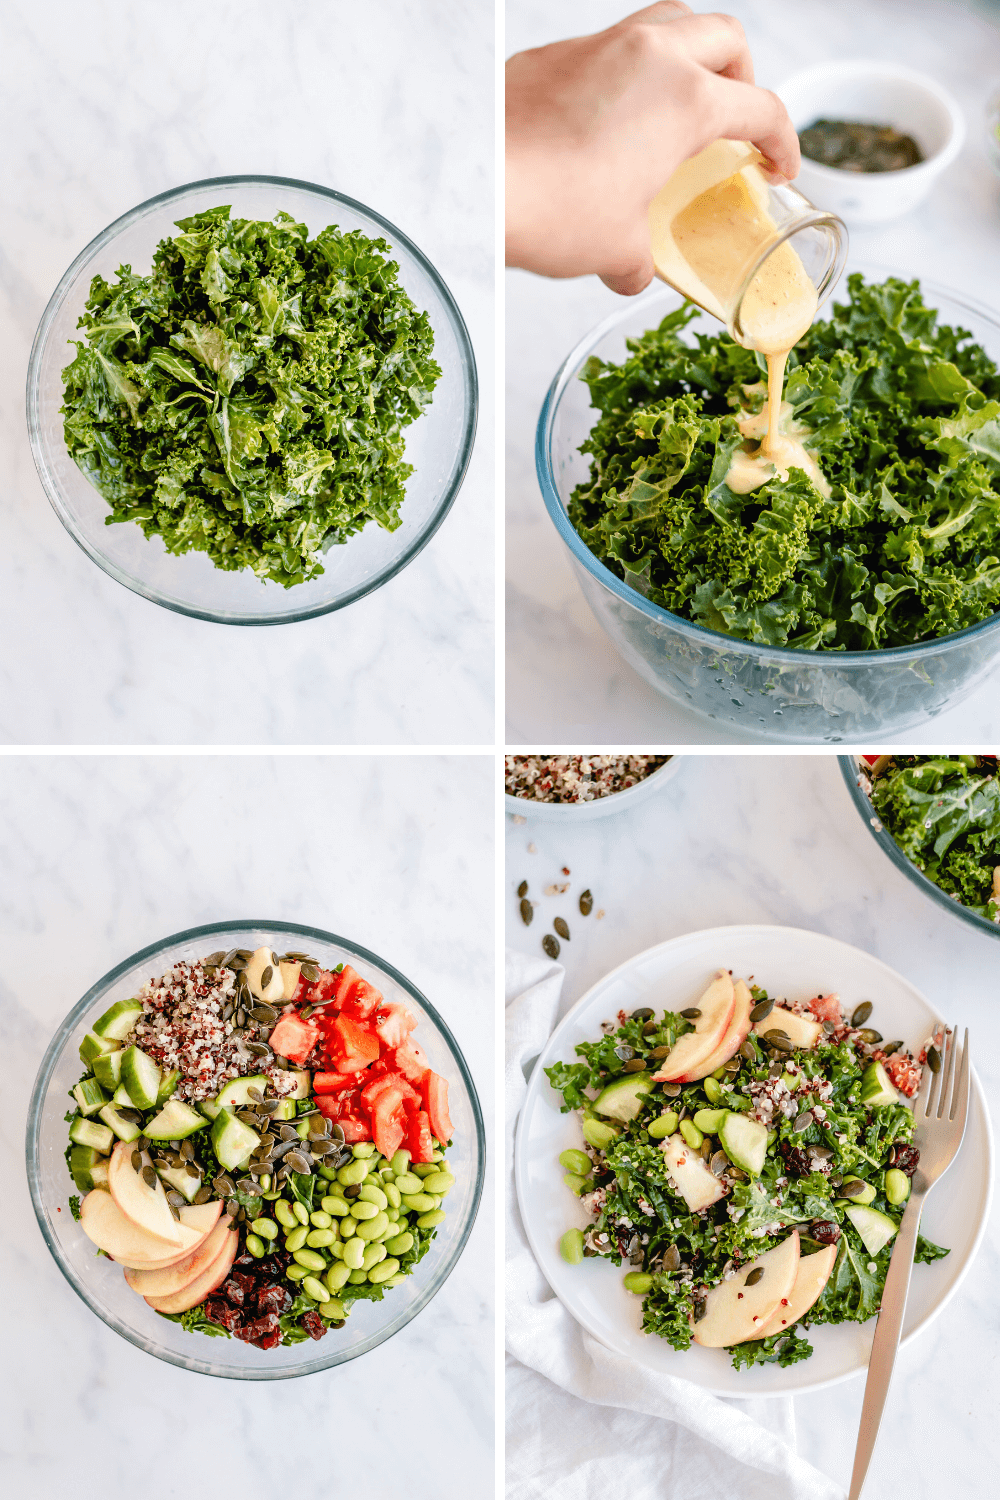 How to make kale and quinoa salad including massaged kale, dressing, and tossed kale salad with apples and edamame.